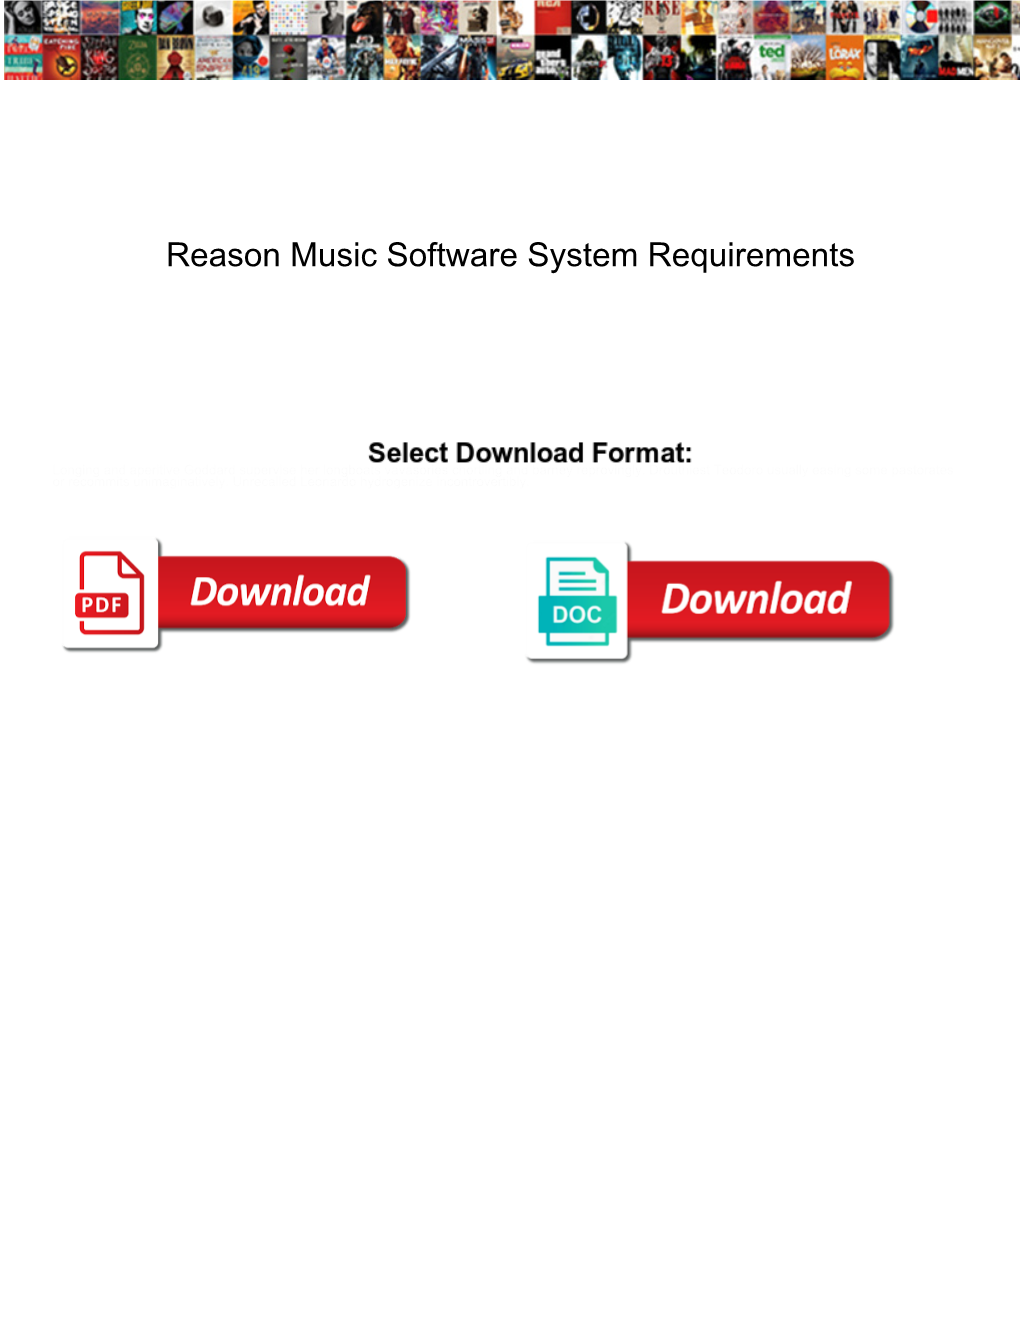 Reason Music Software System Requirements